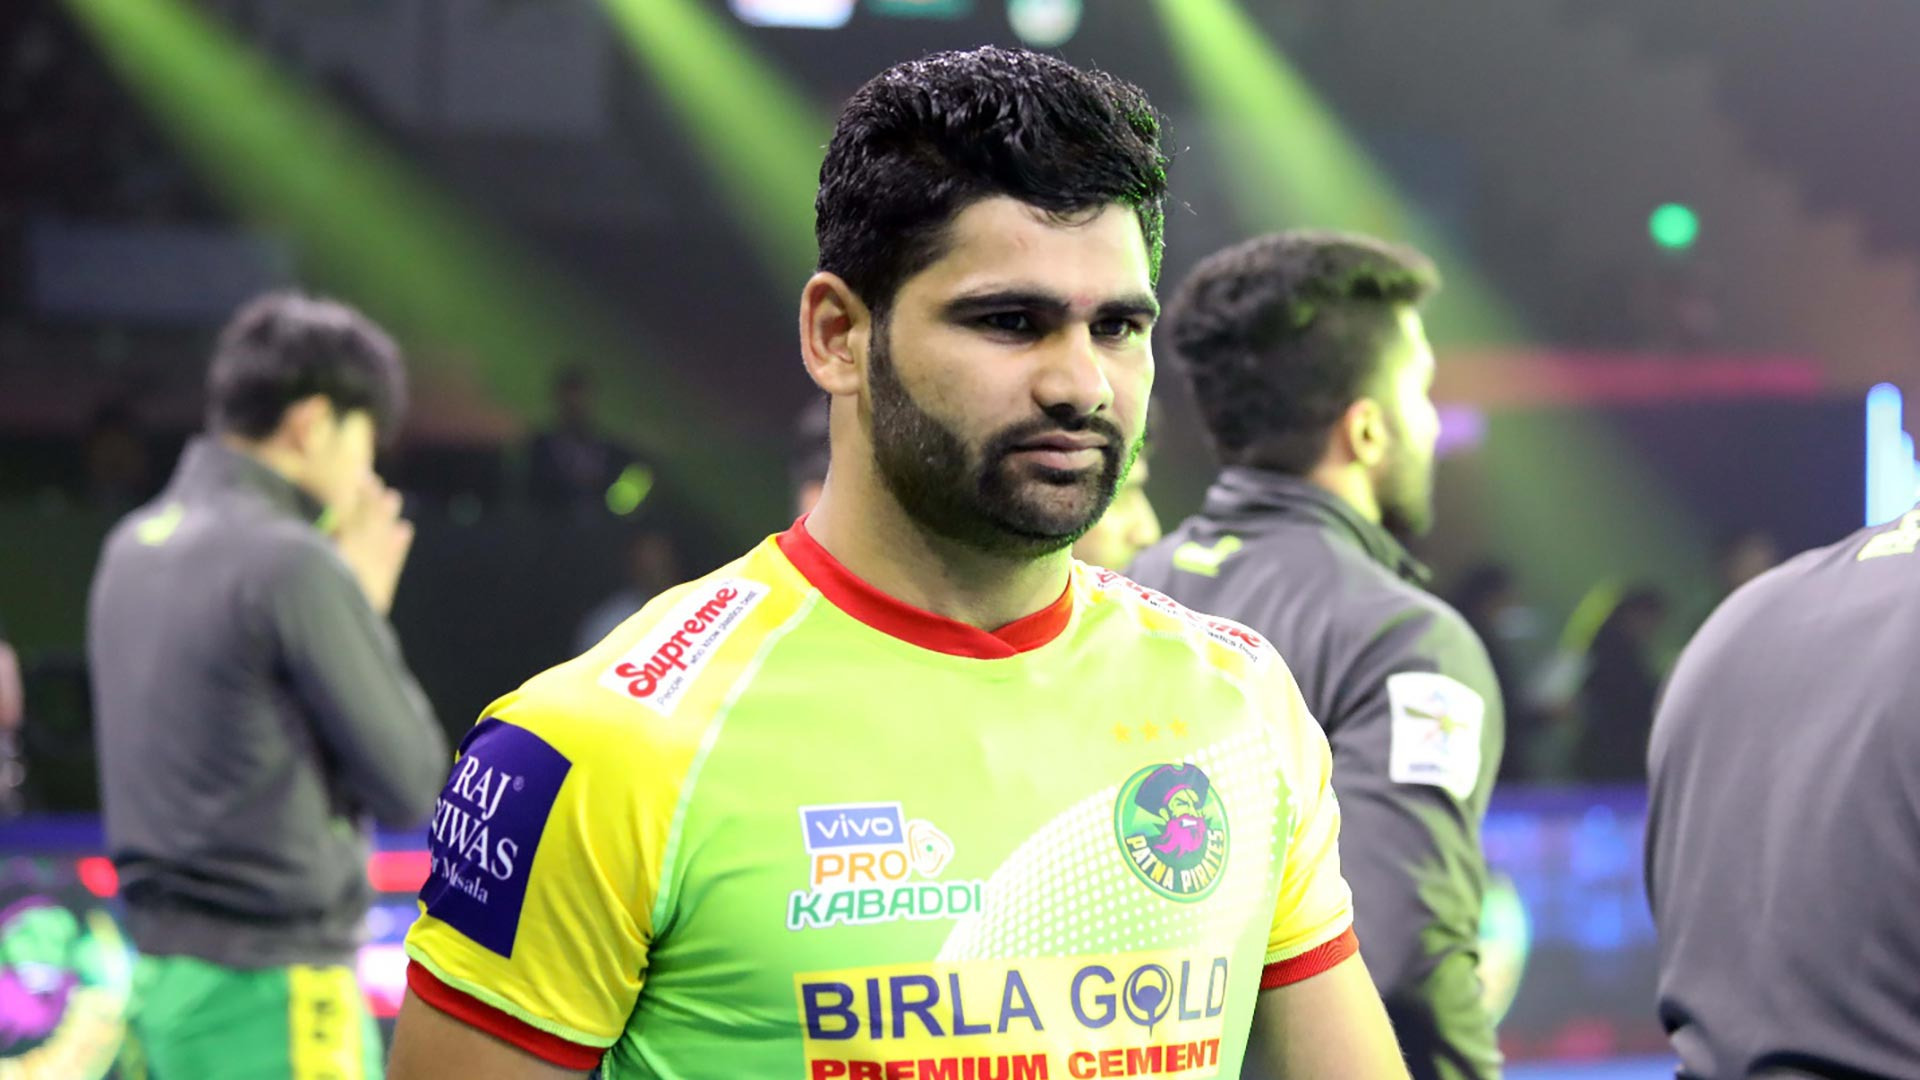 PKL 2021 Auction: Who are the most expensive players in Pro Kabaddi